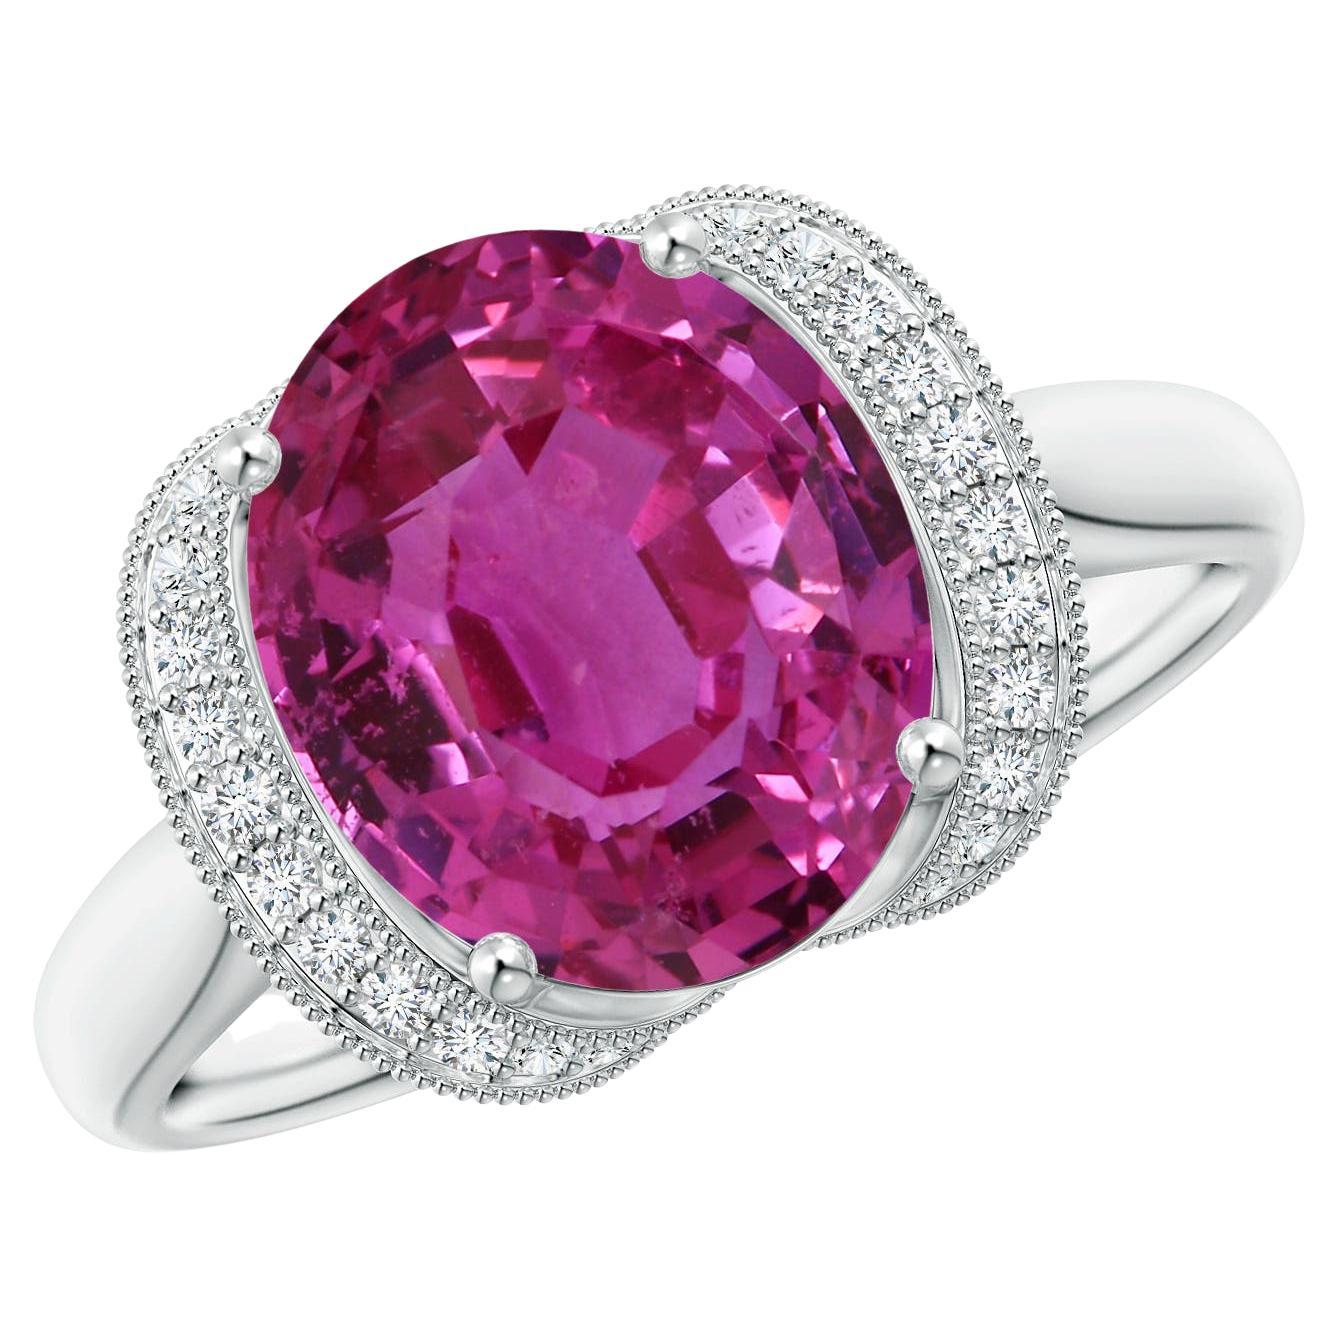 For Sale:  Angara Gia Certified Pink Sapphire Ring in Platinum with Diamond Half Halo